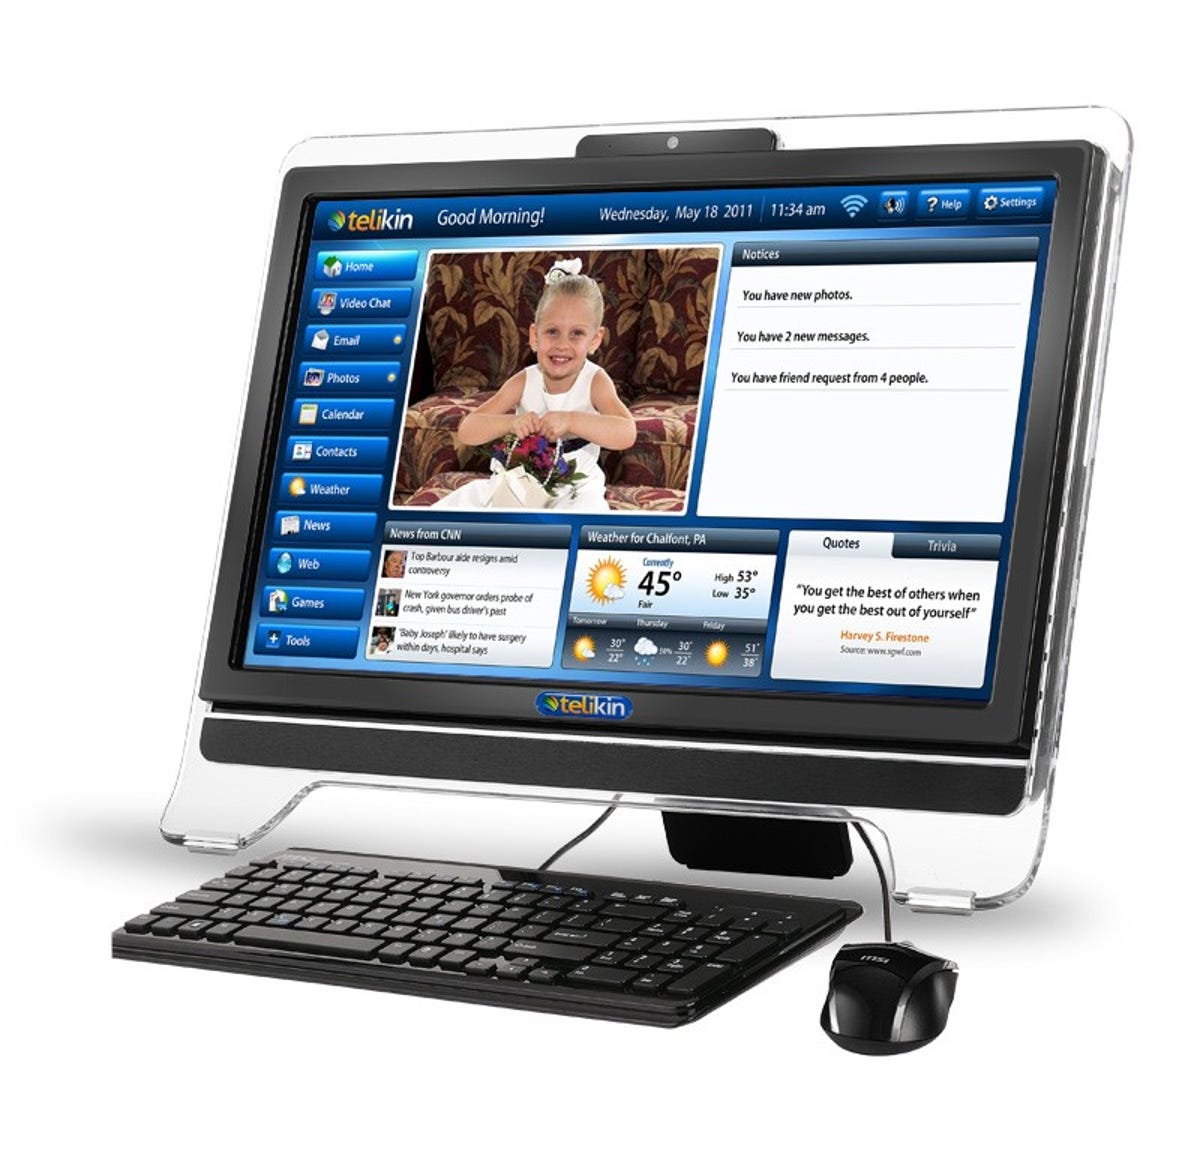 Telikin's 20-inch Elite all-in-one offers computer novices a custom-made touch interface.